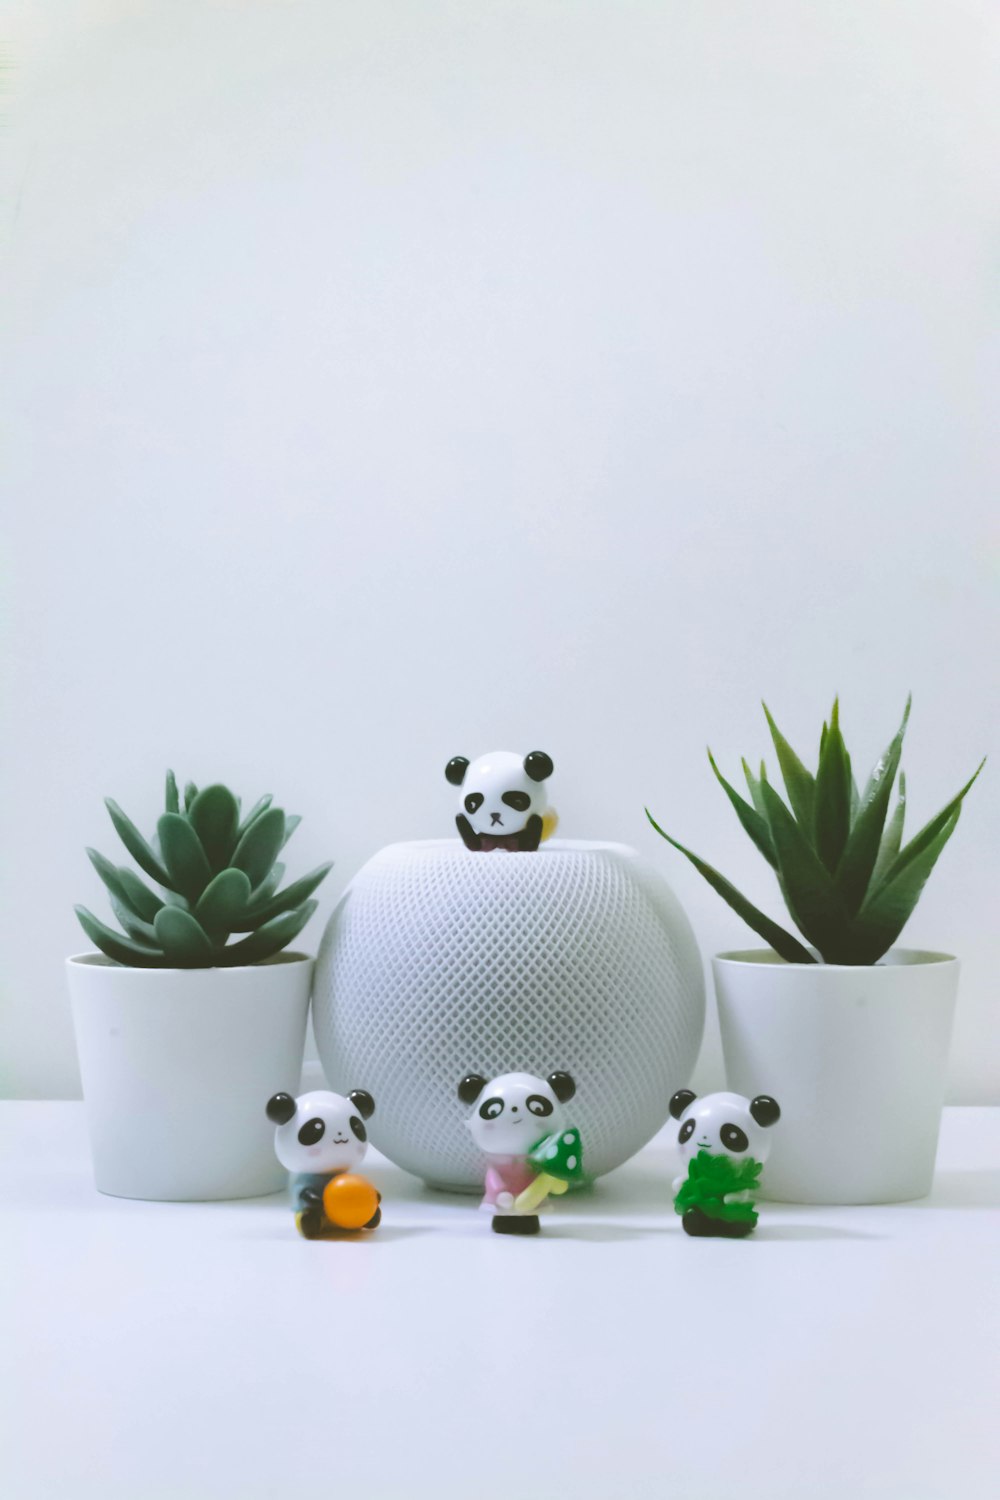 a group of panda bears sitting in front of plants